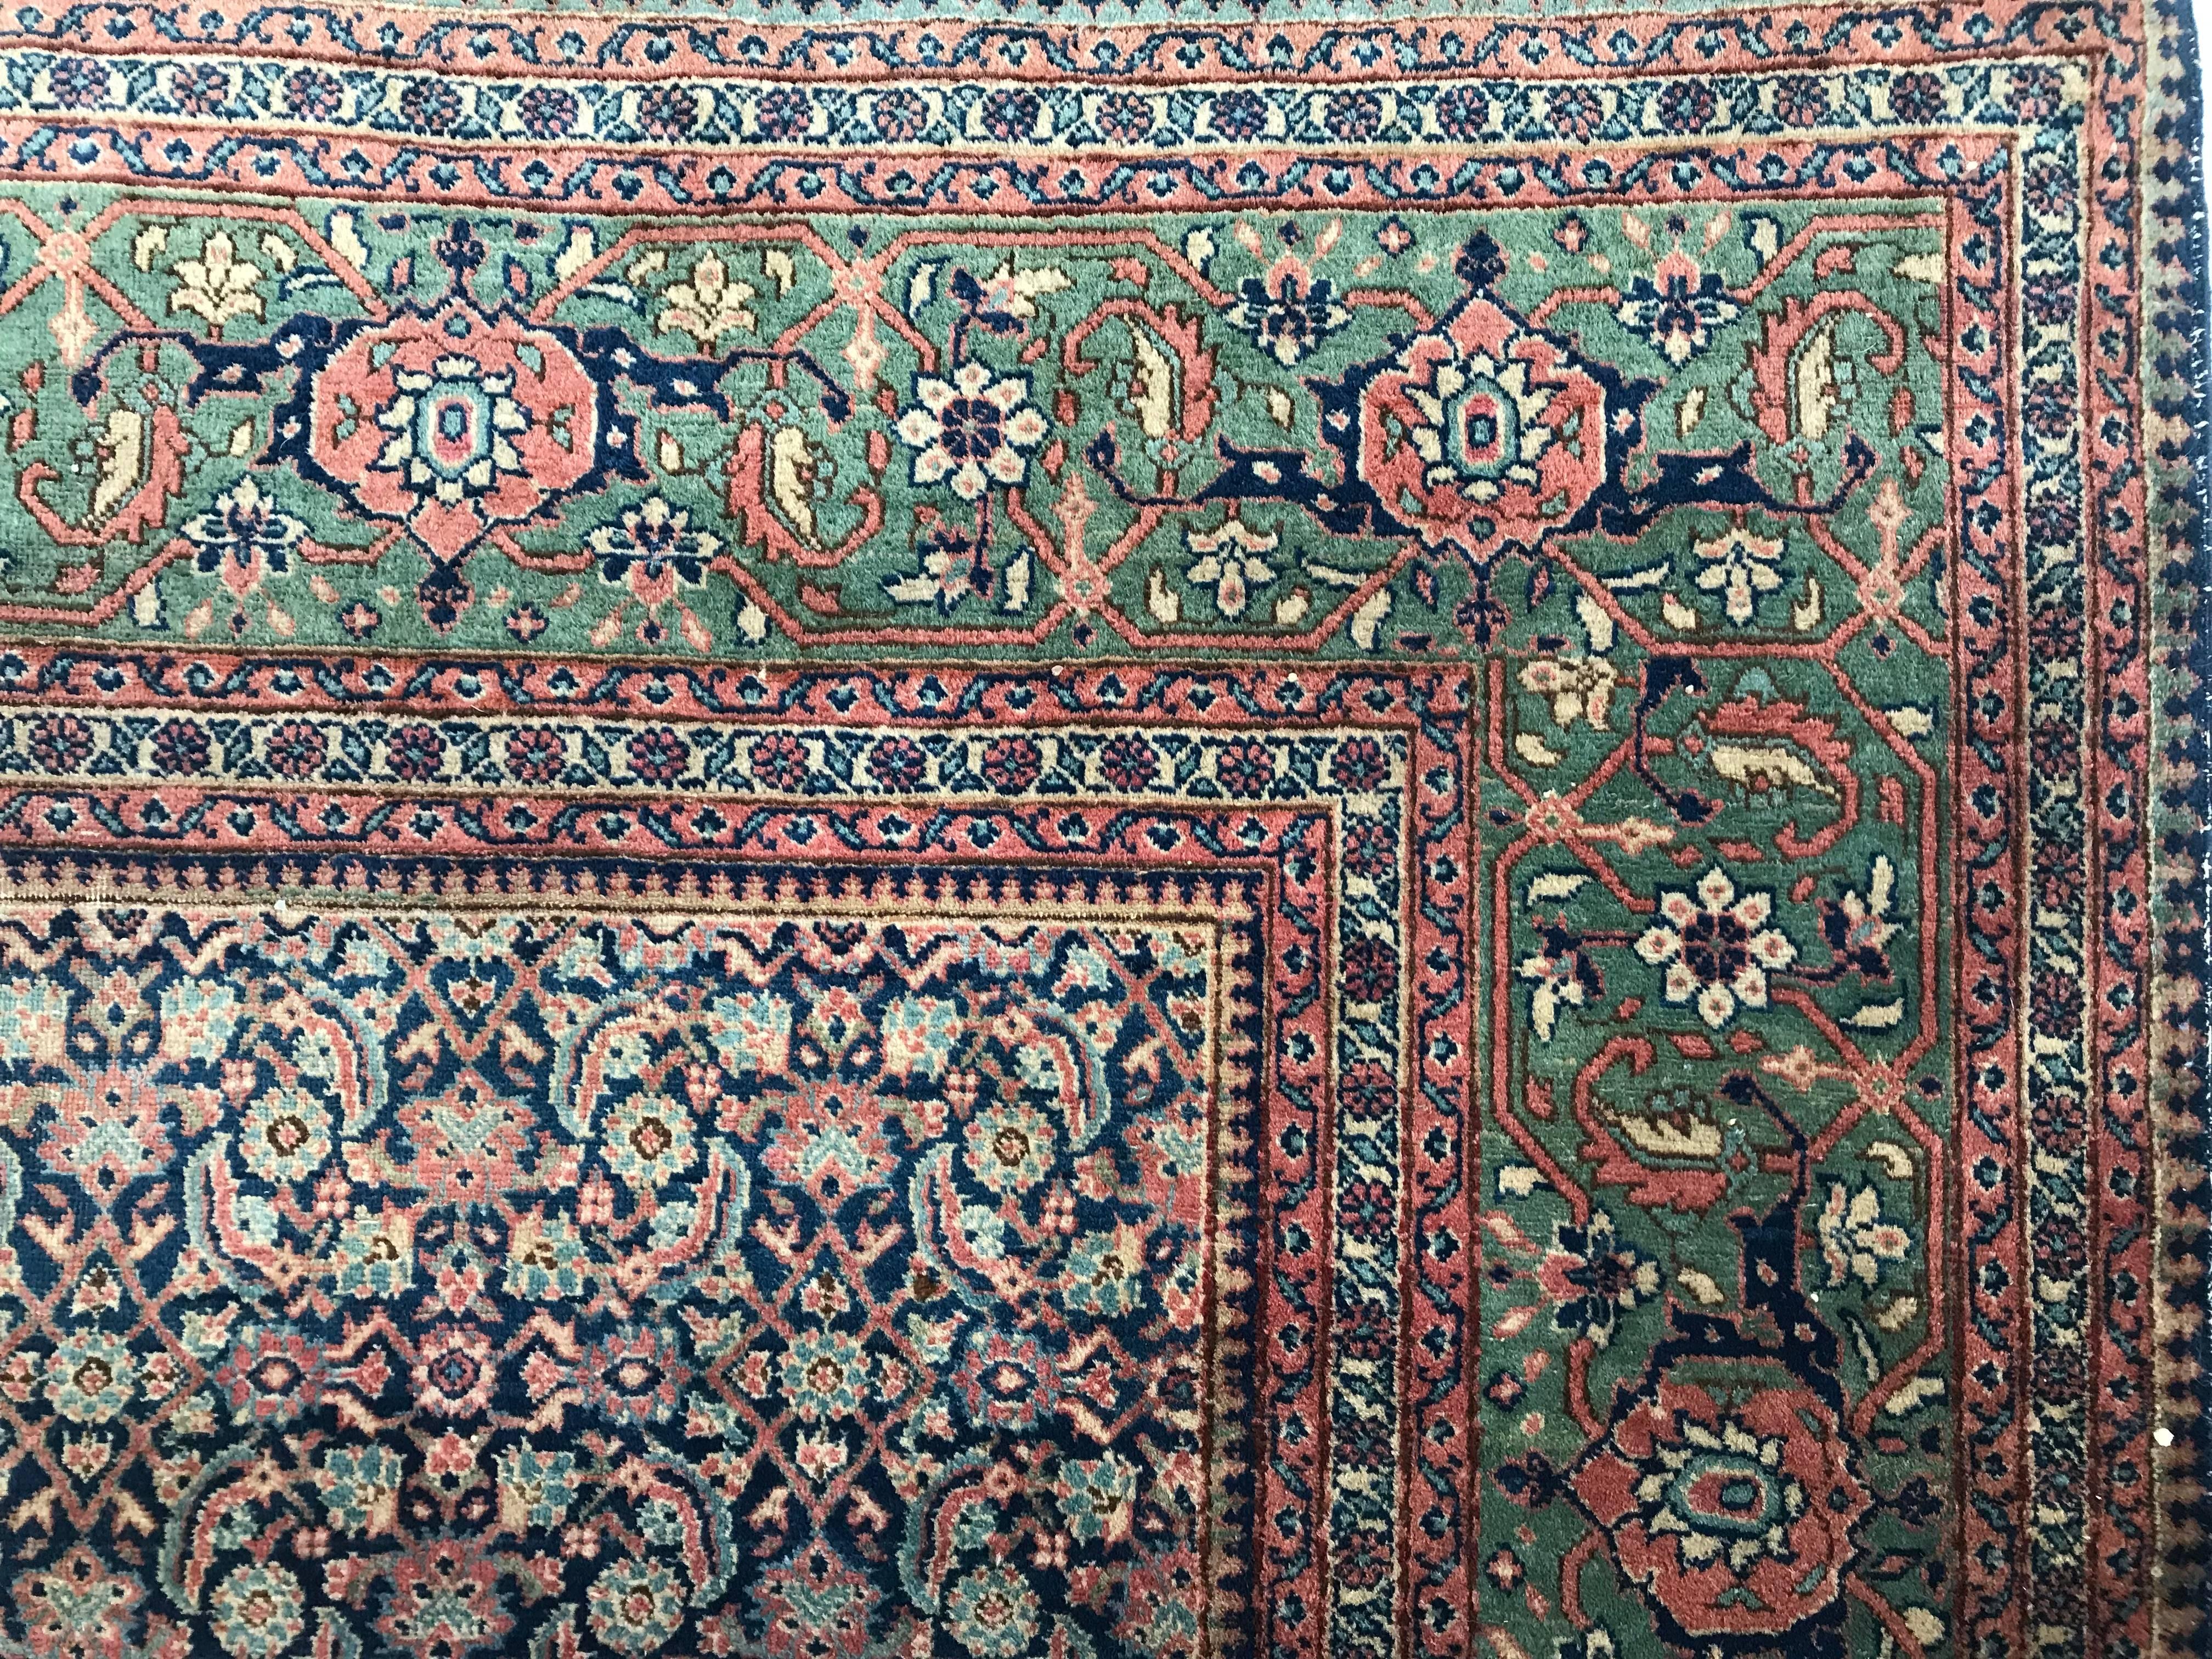 Early 20th Century Persian Rug - Sultanabad